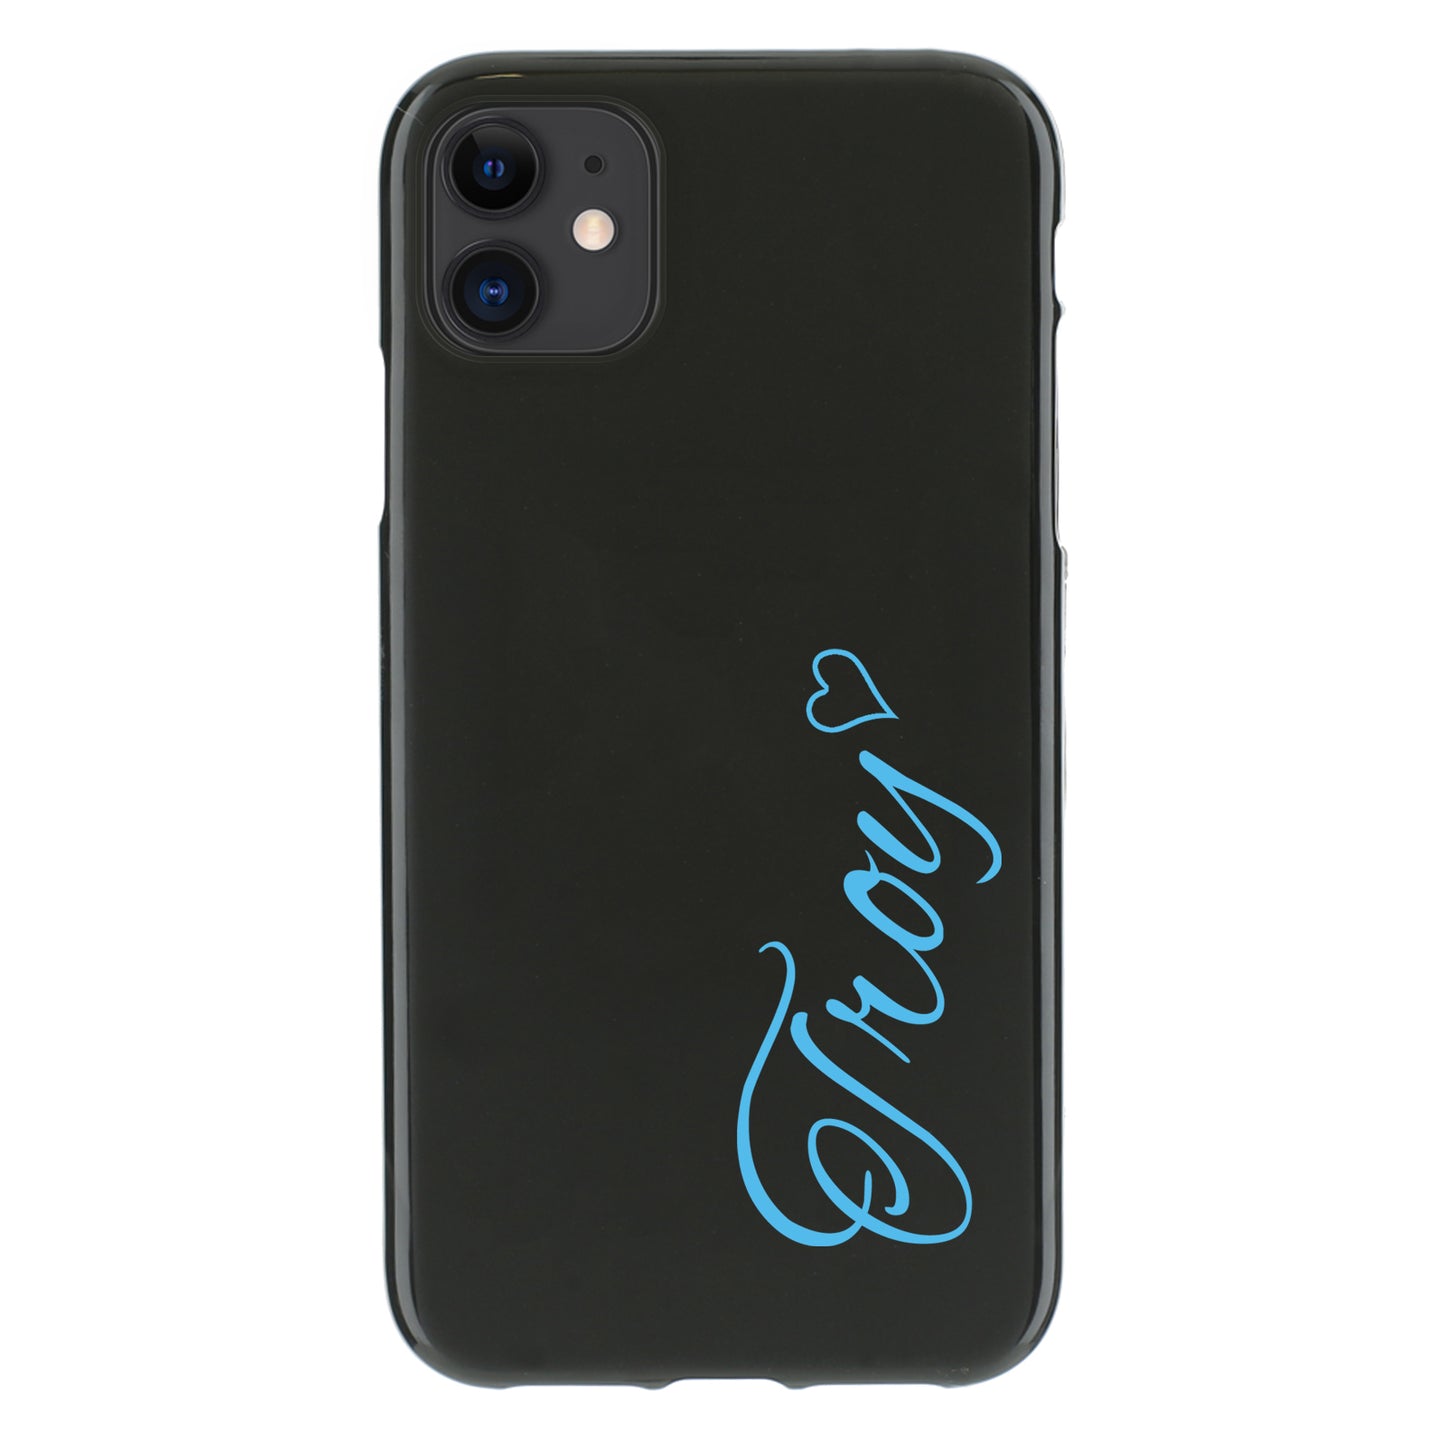 Personalised Motorola Phone Gel Case with Light Blue Heart Accented Text